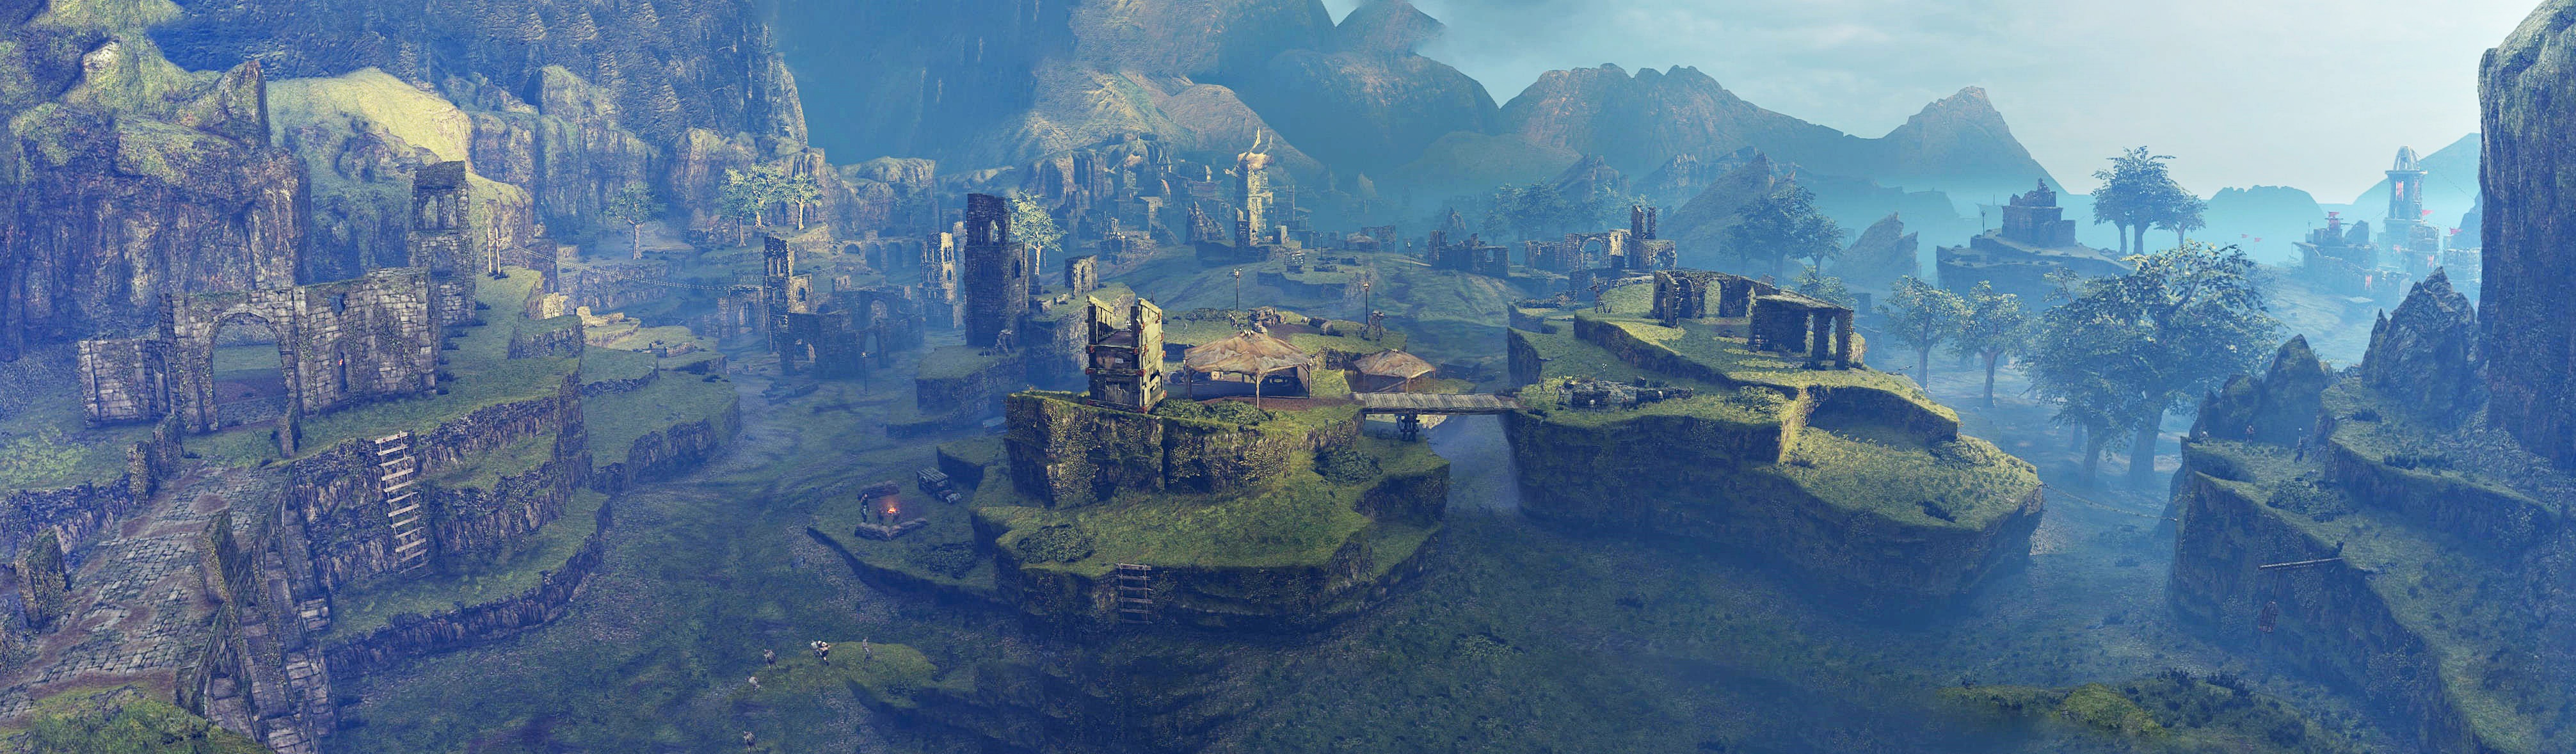 when does middle earth shadow of mordor take place